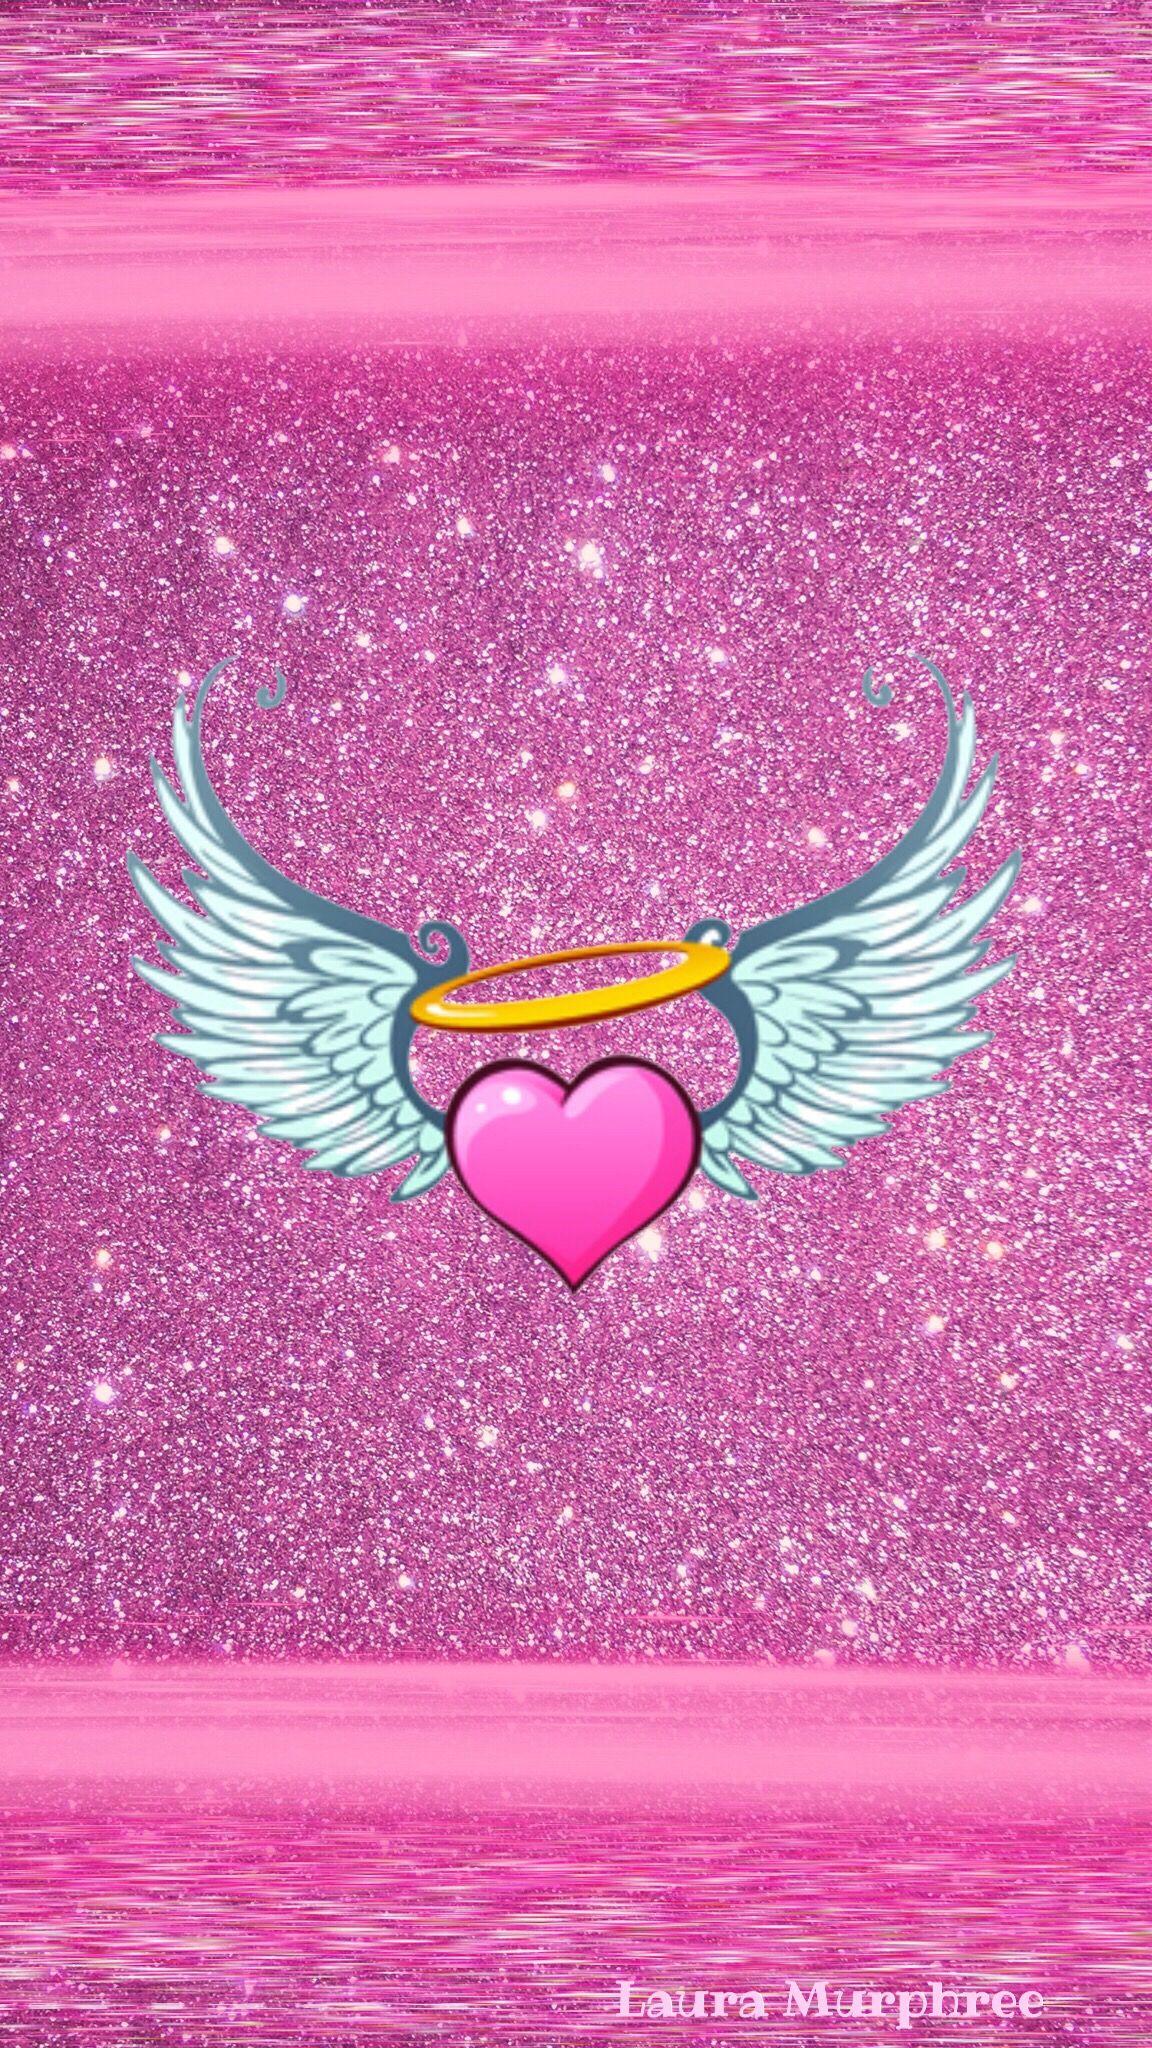 Heart Wing Wallpapers - Wallpaper Cave